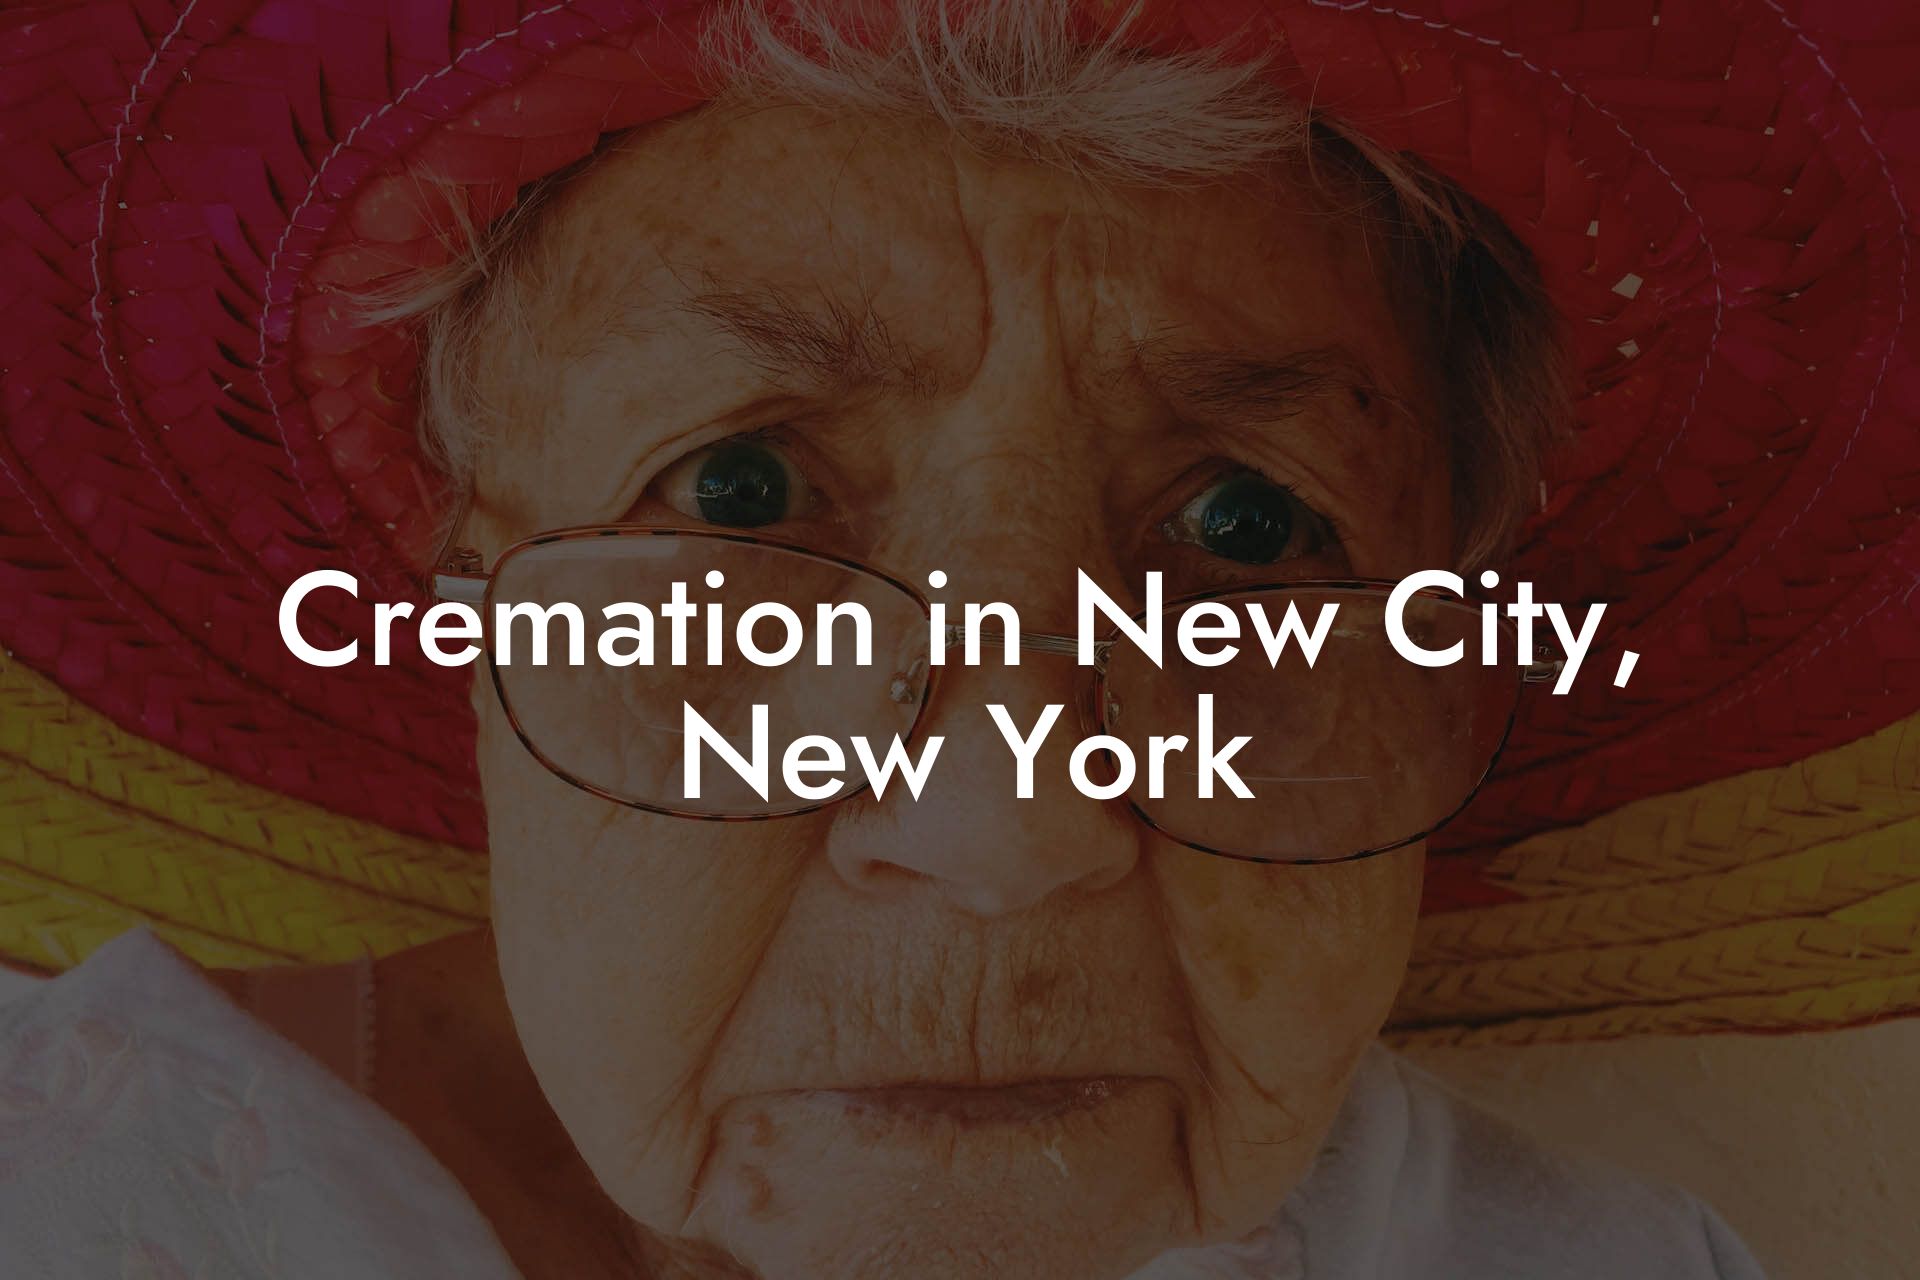 Cremation in New City, New York